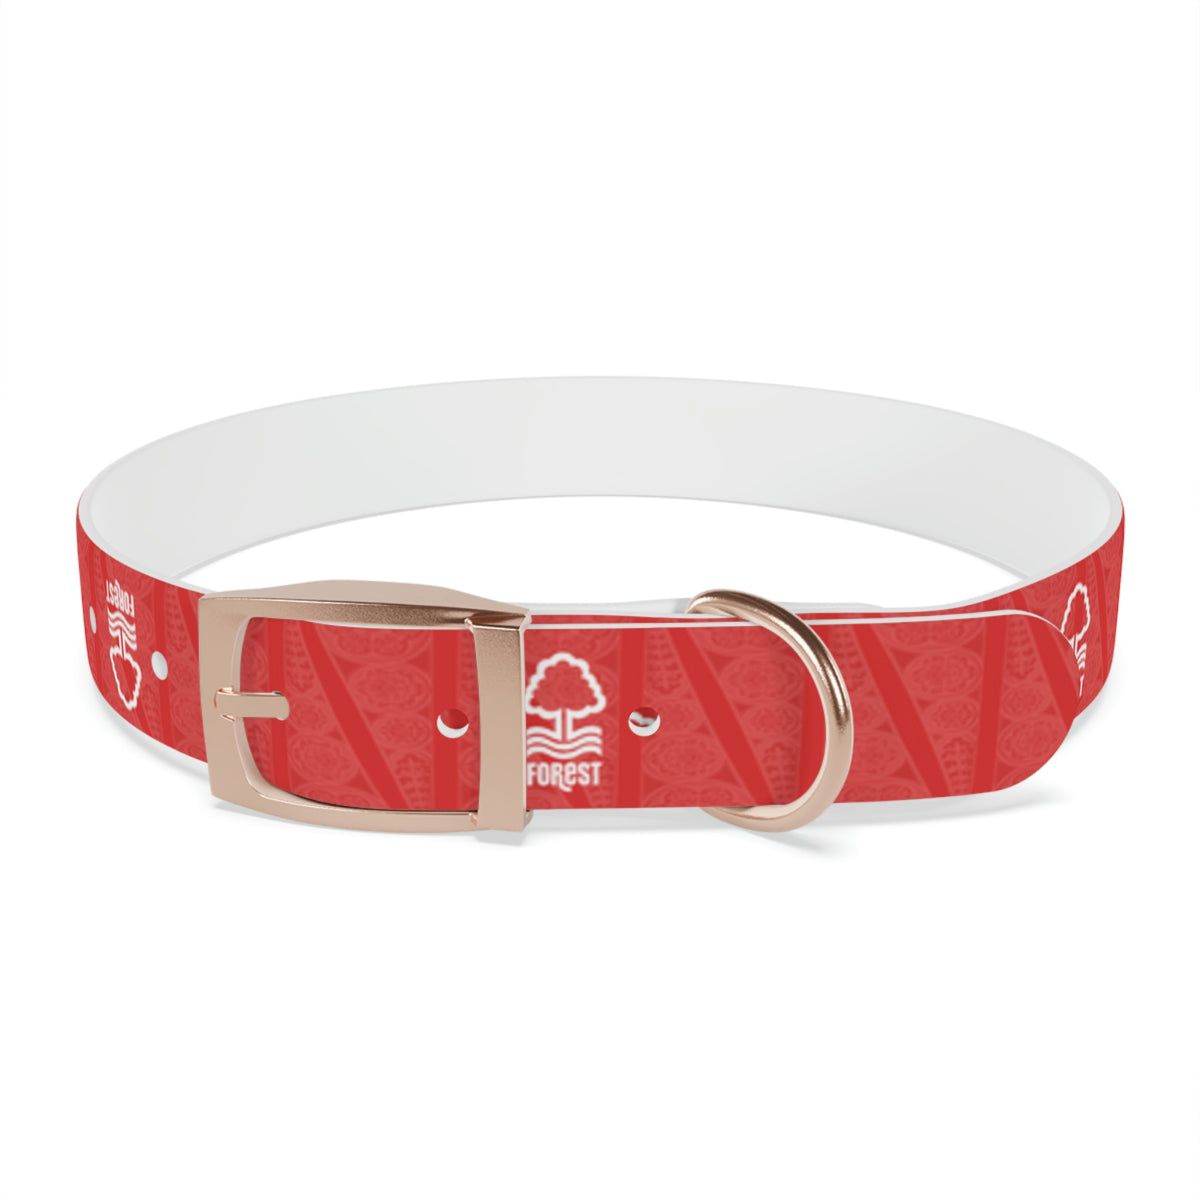 Nottingham Forest FC 23 Home Inspired Waterproof Collar - 3 Red Rovers